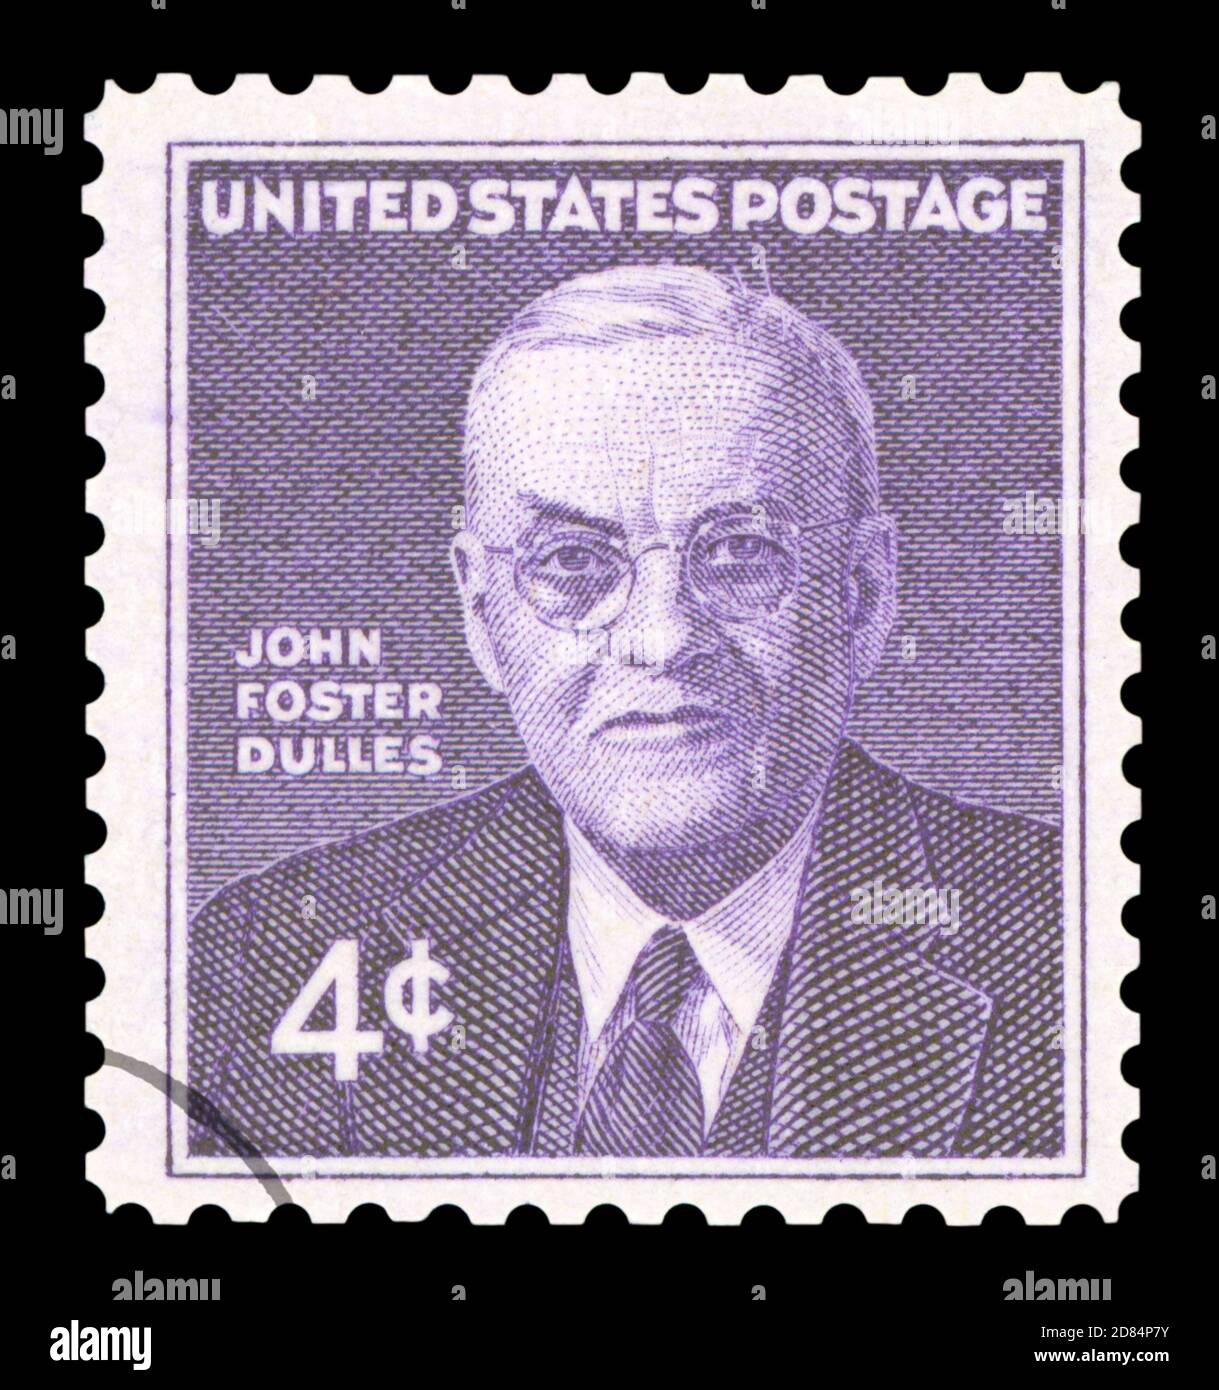 UNITED STATES OF AMERICA - CIRCA 1960: A used postage stamp from the USA, depicting an illustration of historic American Politician John Foster Dulles Stock Photo